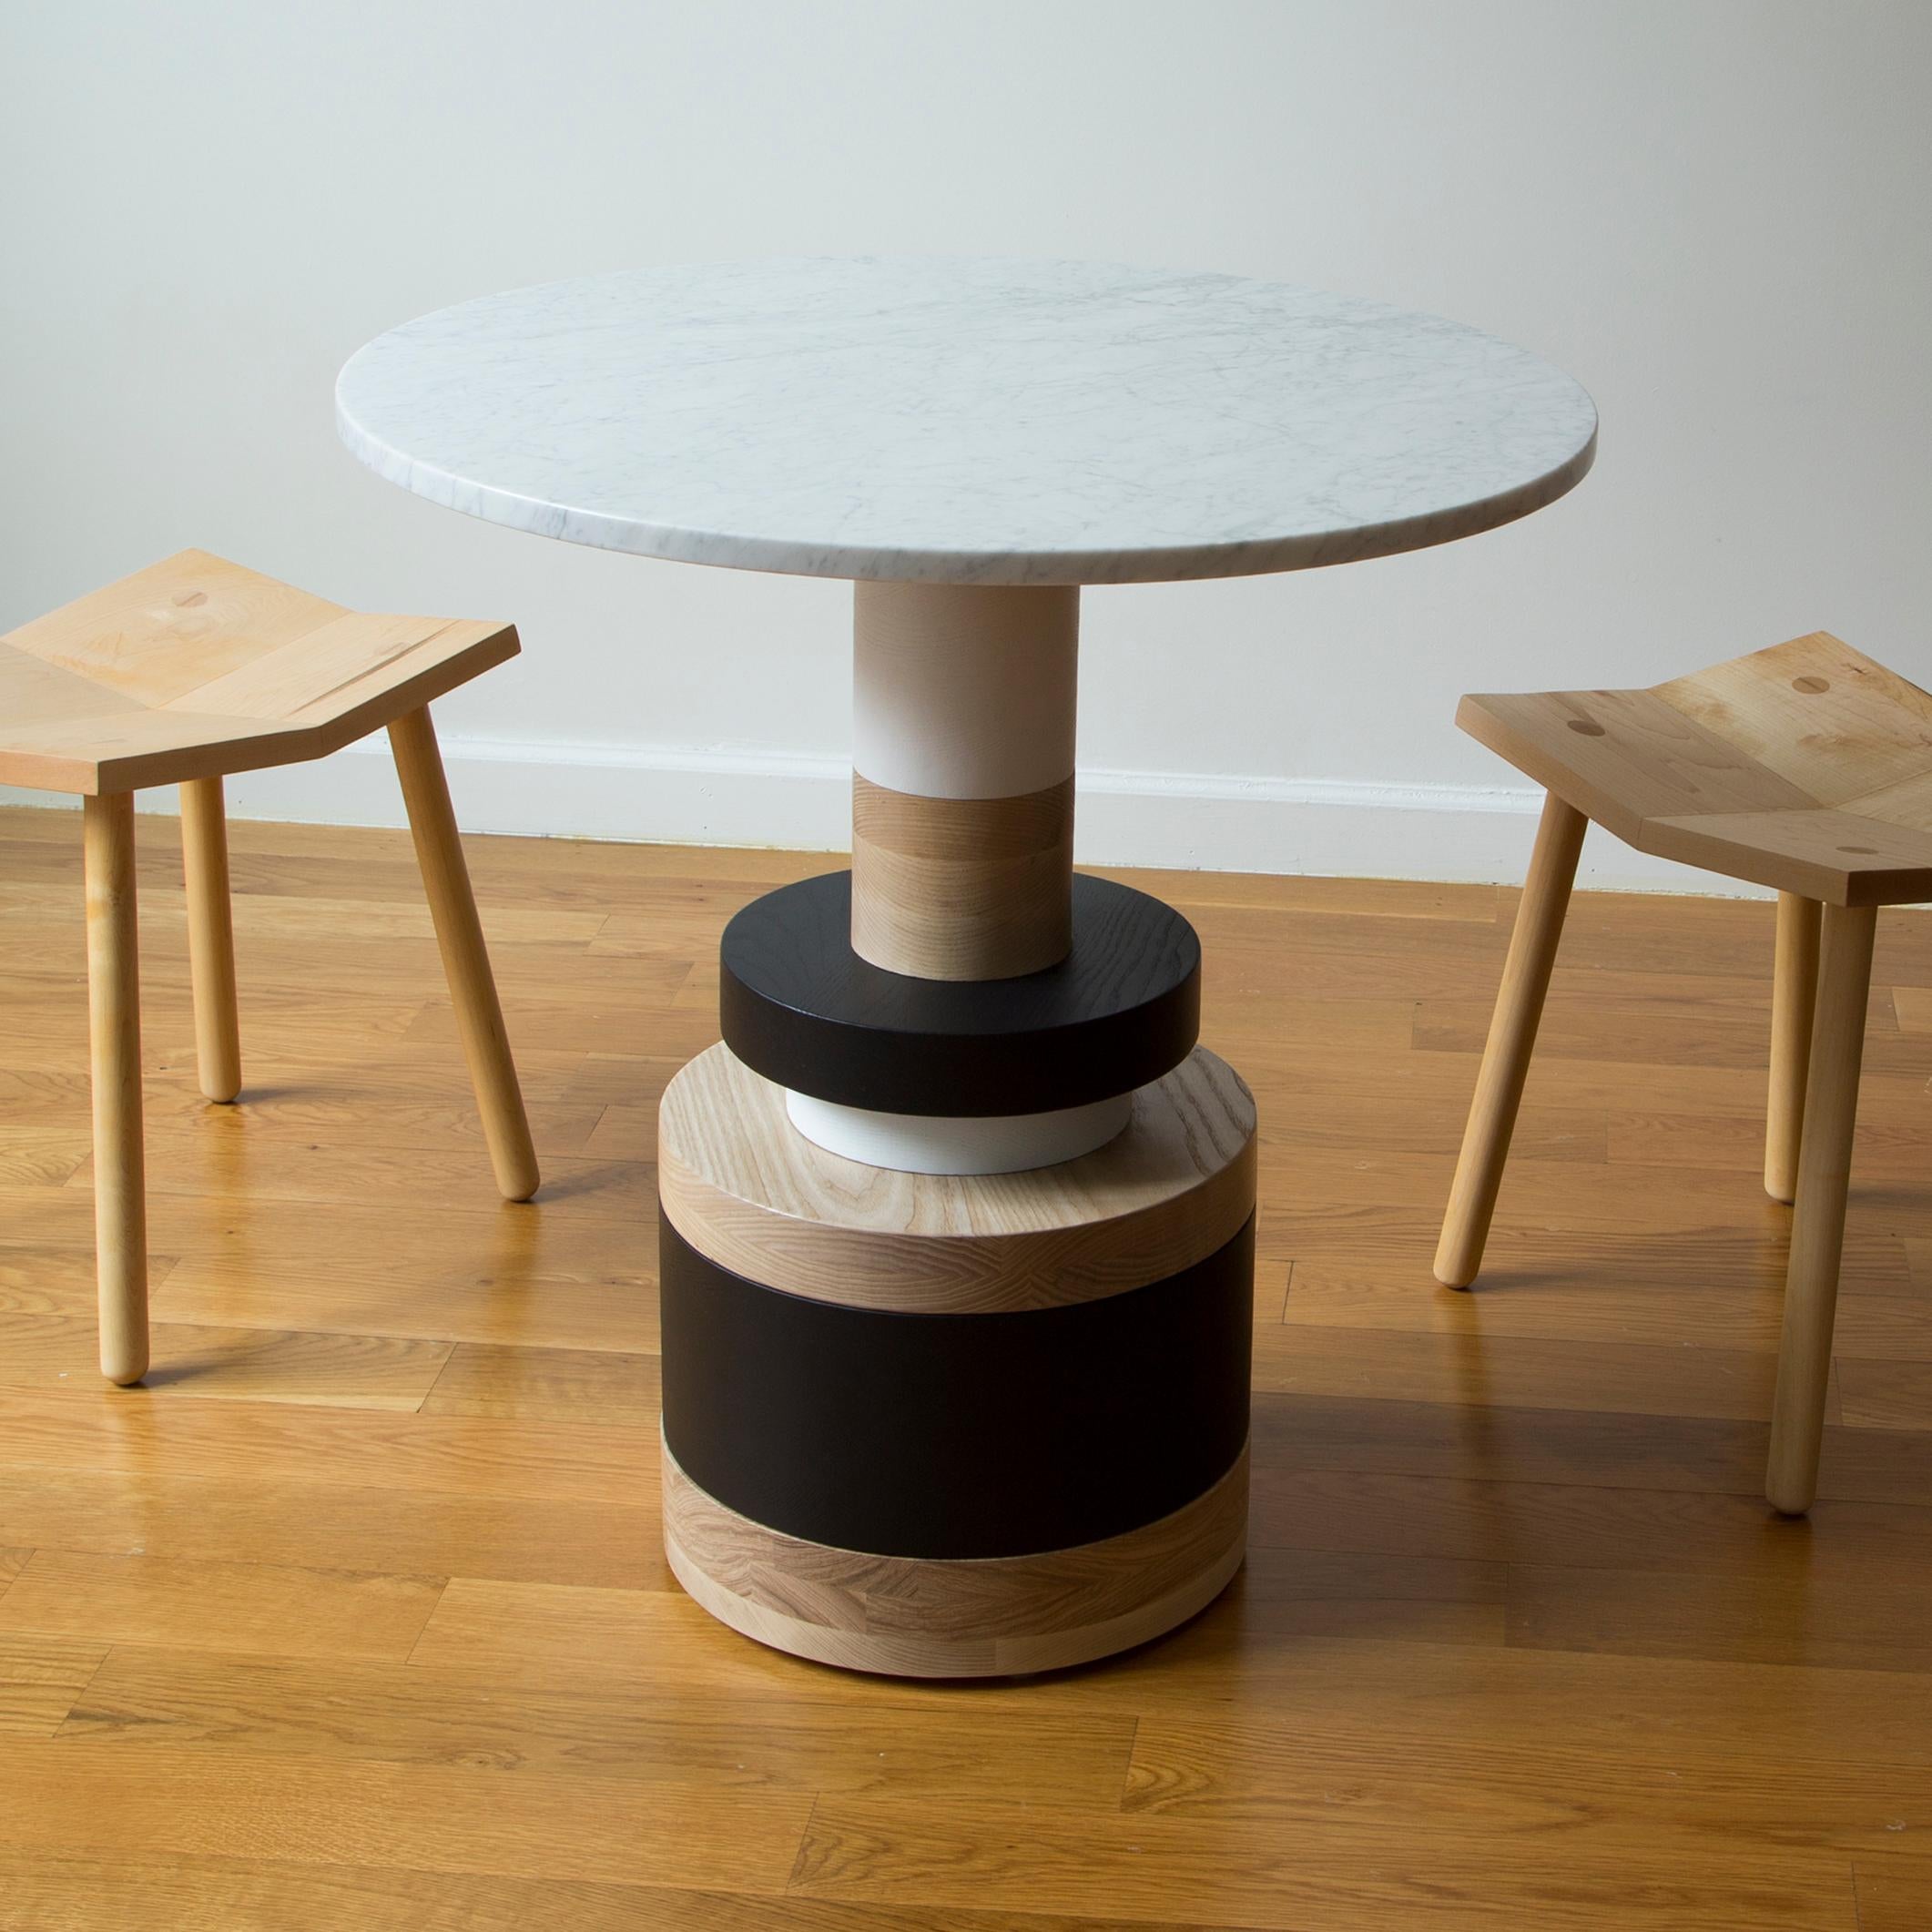 The Sottsass-inspired “Sass Dining Table” is a bold, graphic statement piece. A polished Nero Marquina marble top sits on an Amish-made base composed of painted and stacked wood circles. 

The version as shown is 36